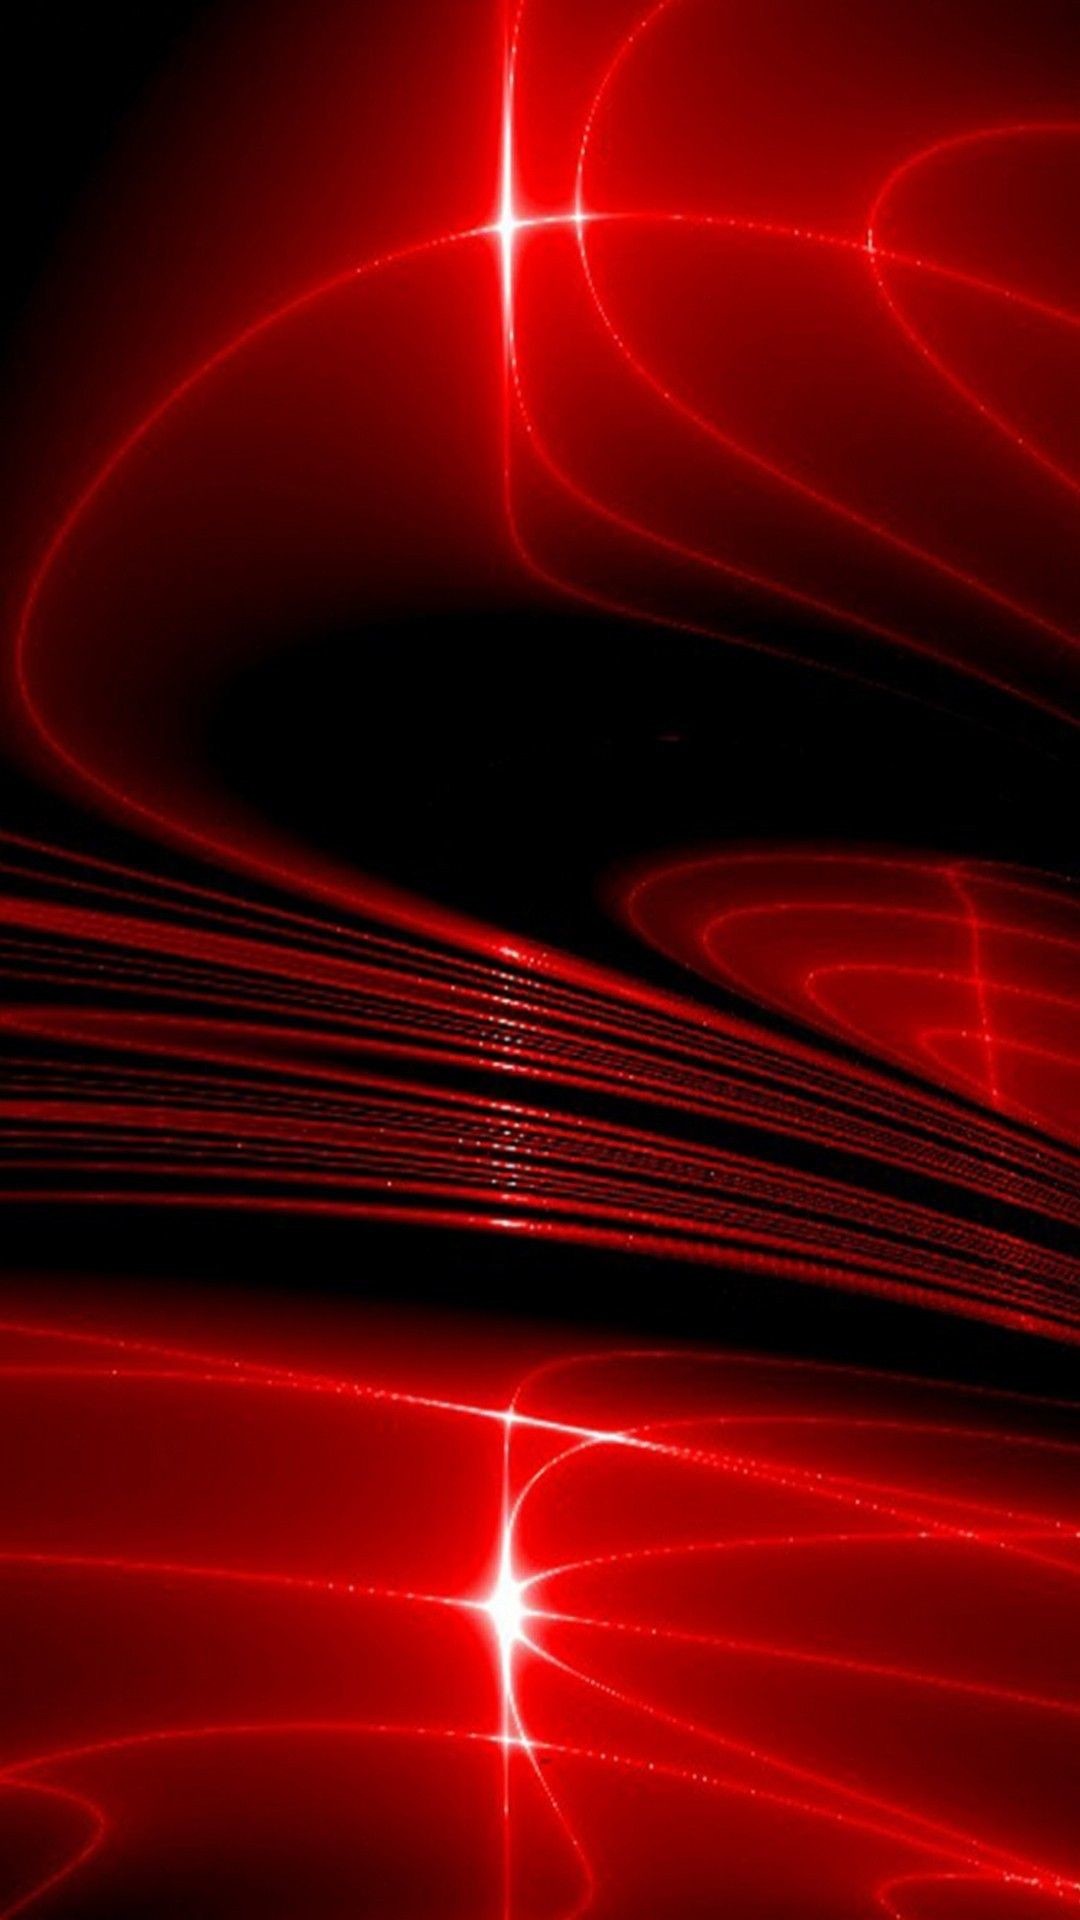 Cool Abstract Hd Wallpapers For Mobile - Best Wallpaper Hd For Mobile -  1080x1920 Wallpaper 